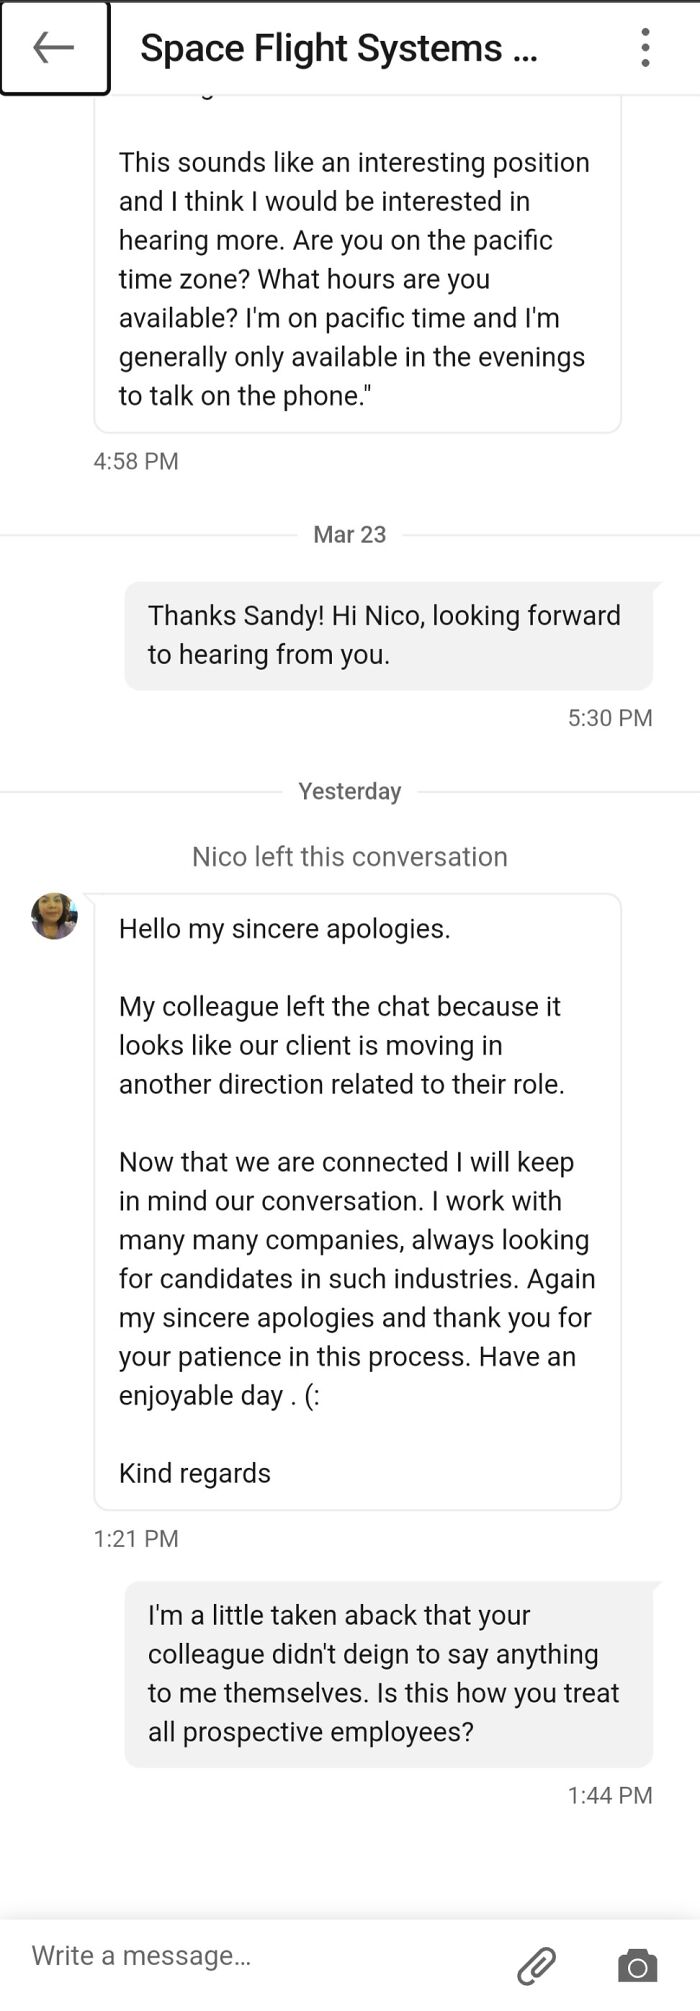 Recruiter Put Me In A Group Chat With A Enployee From The Company. The Employee Looked At My Profile And Promptly Left The Chat Without Saying A Word. Note, I Was Qualified For This Job